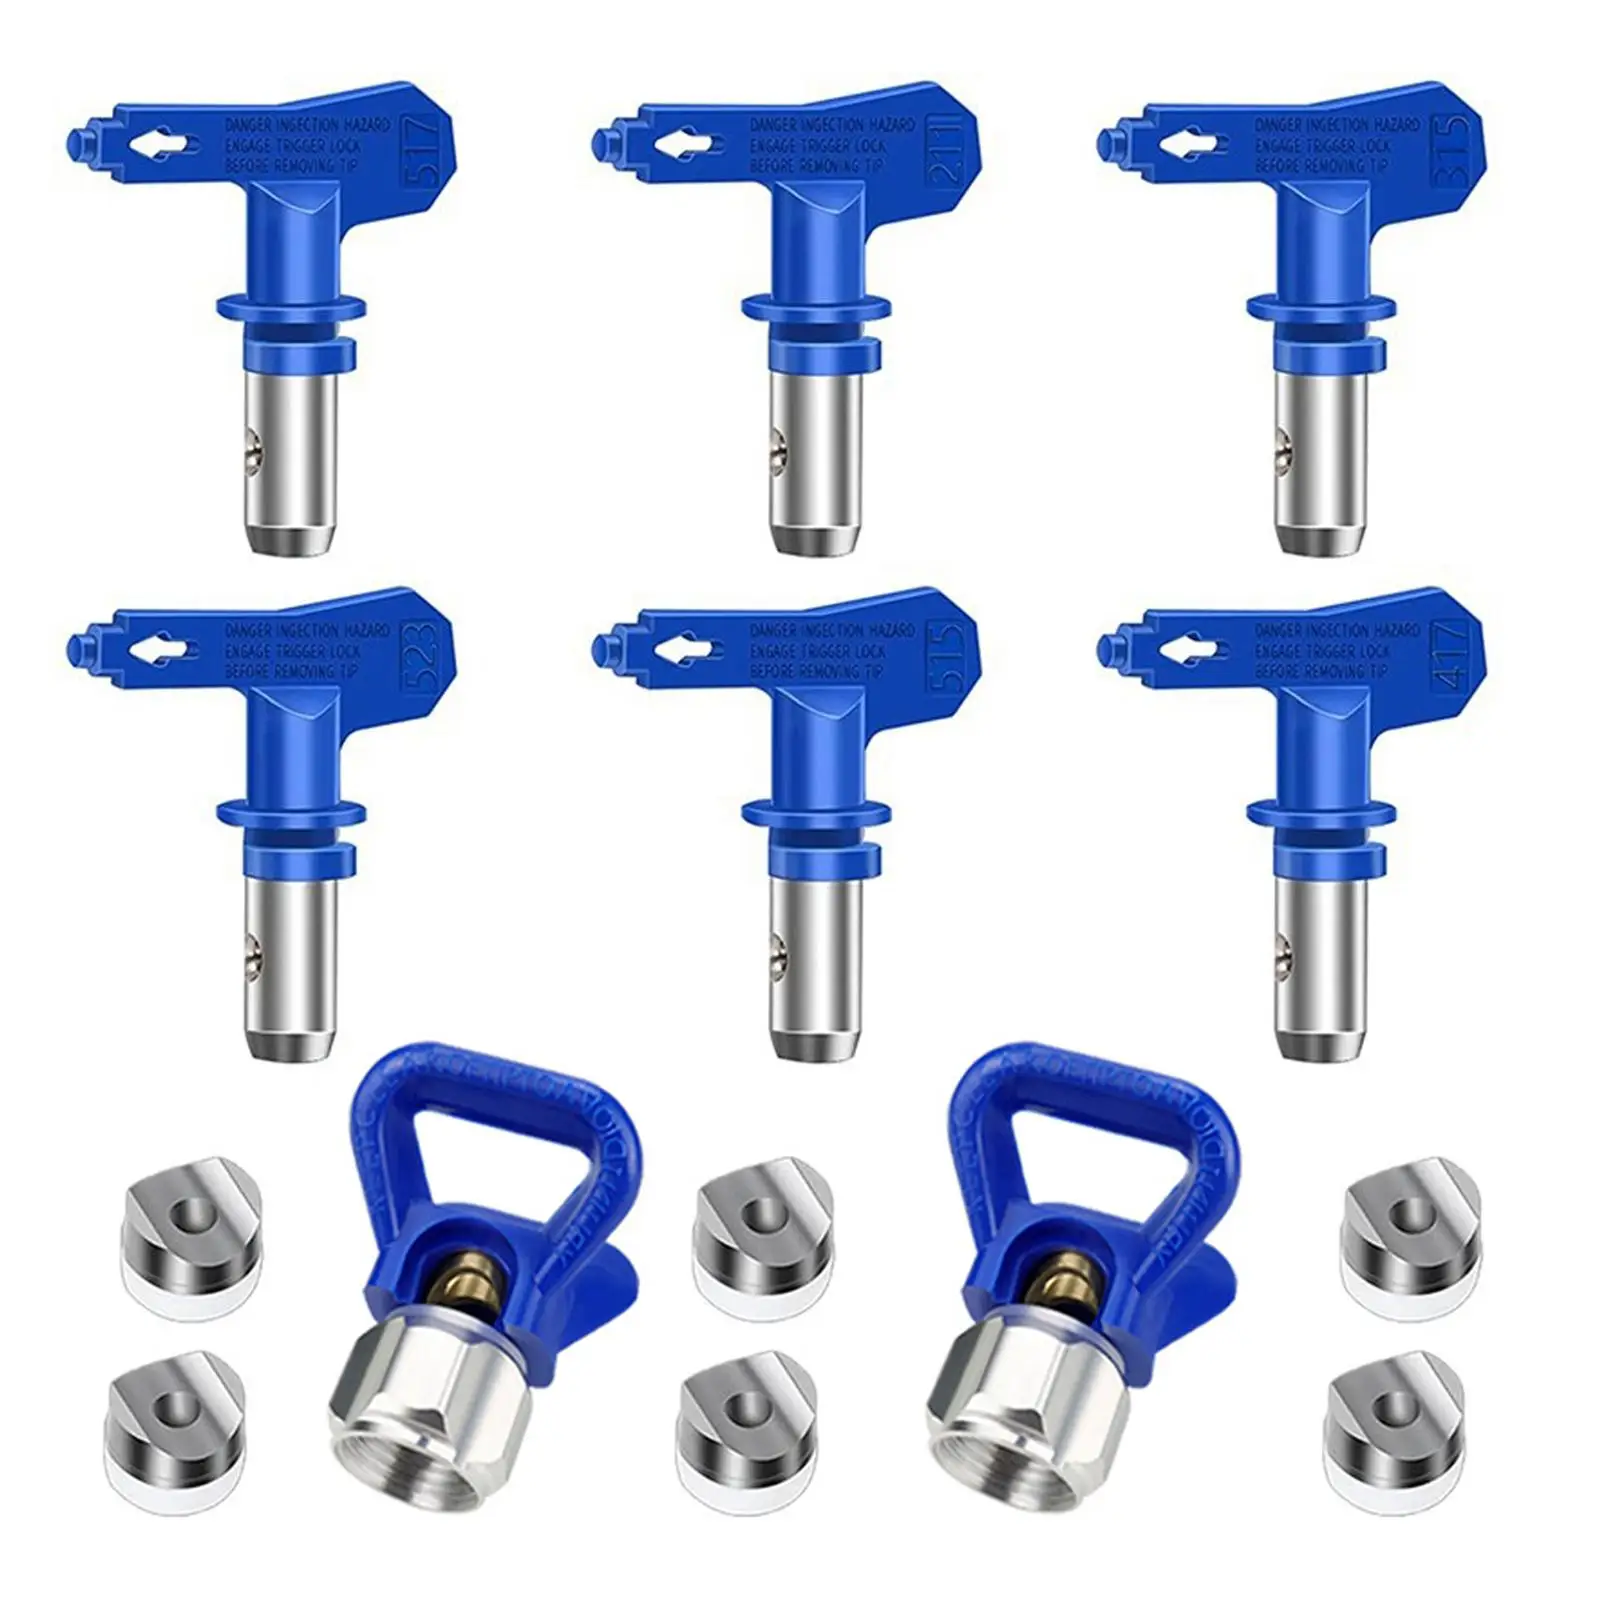 6x Reversible Spray Tip and Nozzle Guards Airless Paint Sprayer Tips for Decks Decorators Buildings Furniture Industrial Enamel